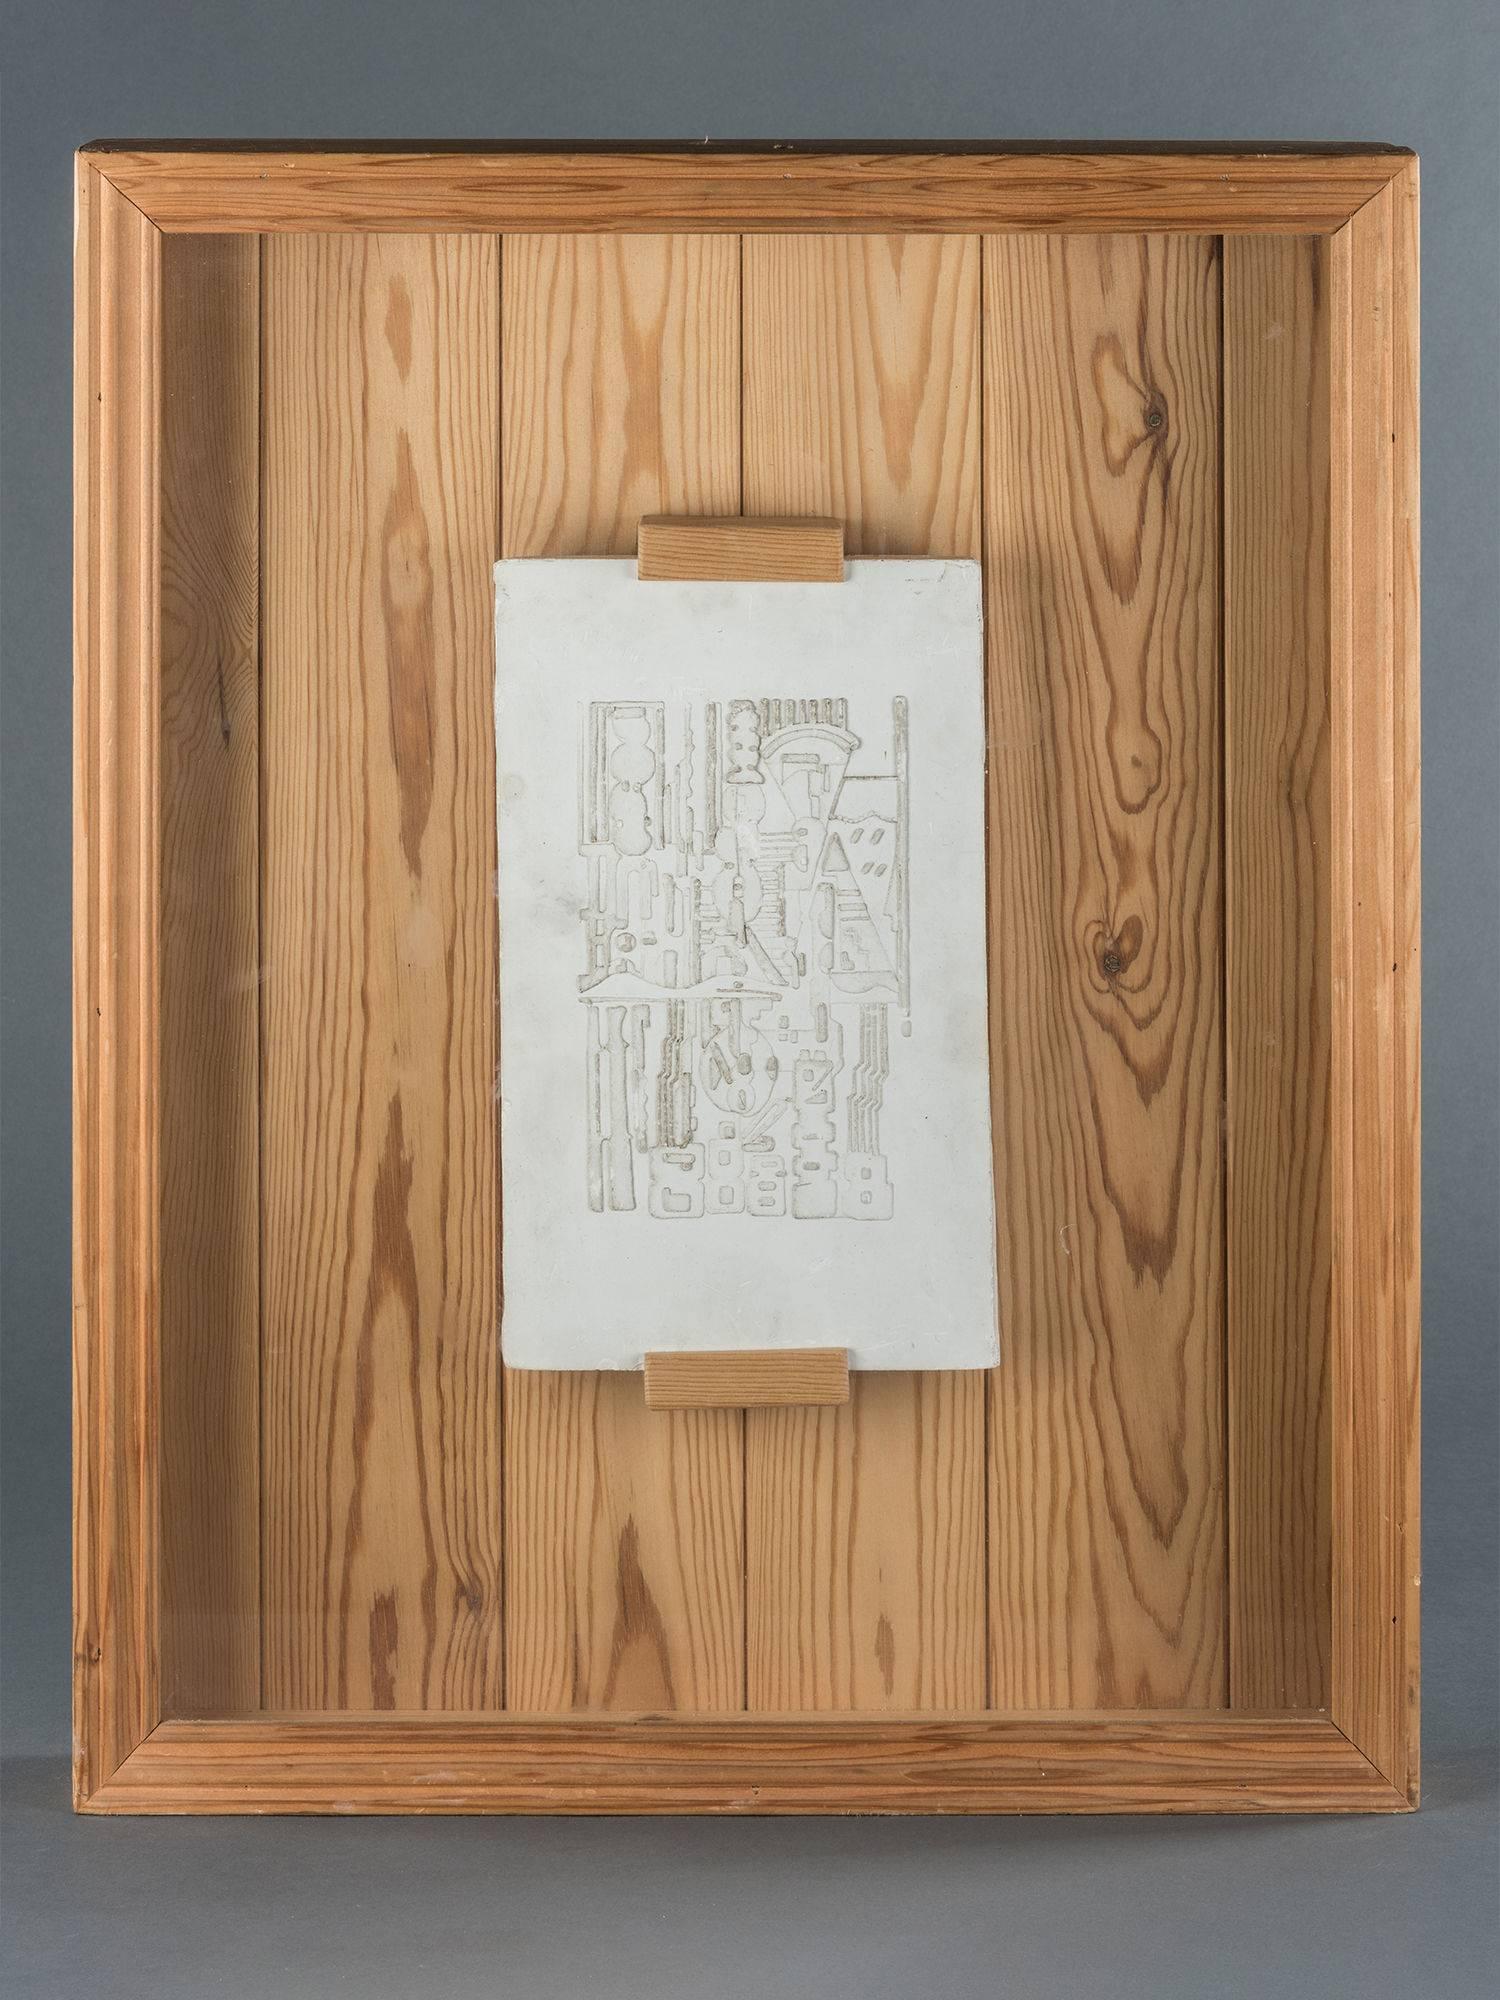 Plaster 

Inscribed and dated verso 
E. Paolozzi Oxford 82 

Displayed in a glazed pine framed box 

Provenance 
Gift of the artist 
Ruskin School of Art Oxford University.